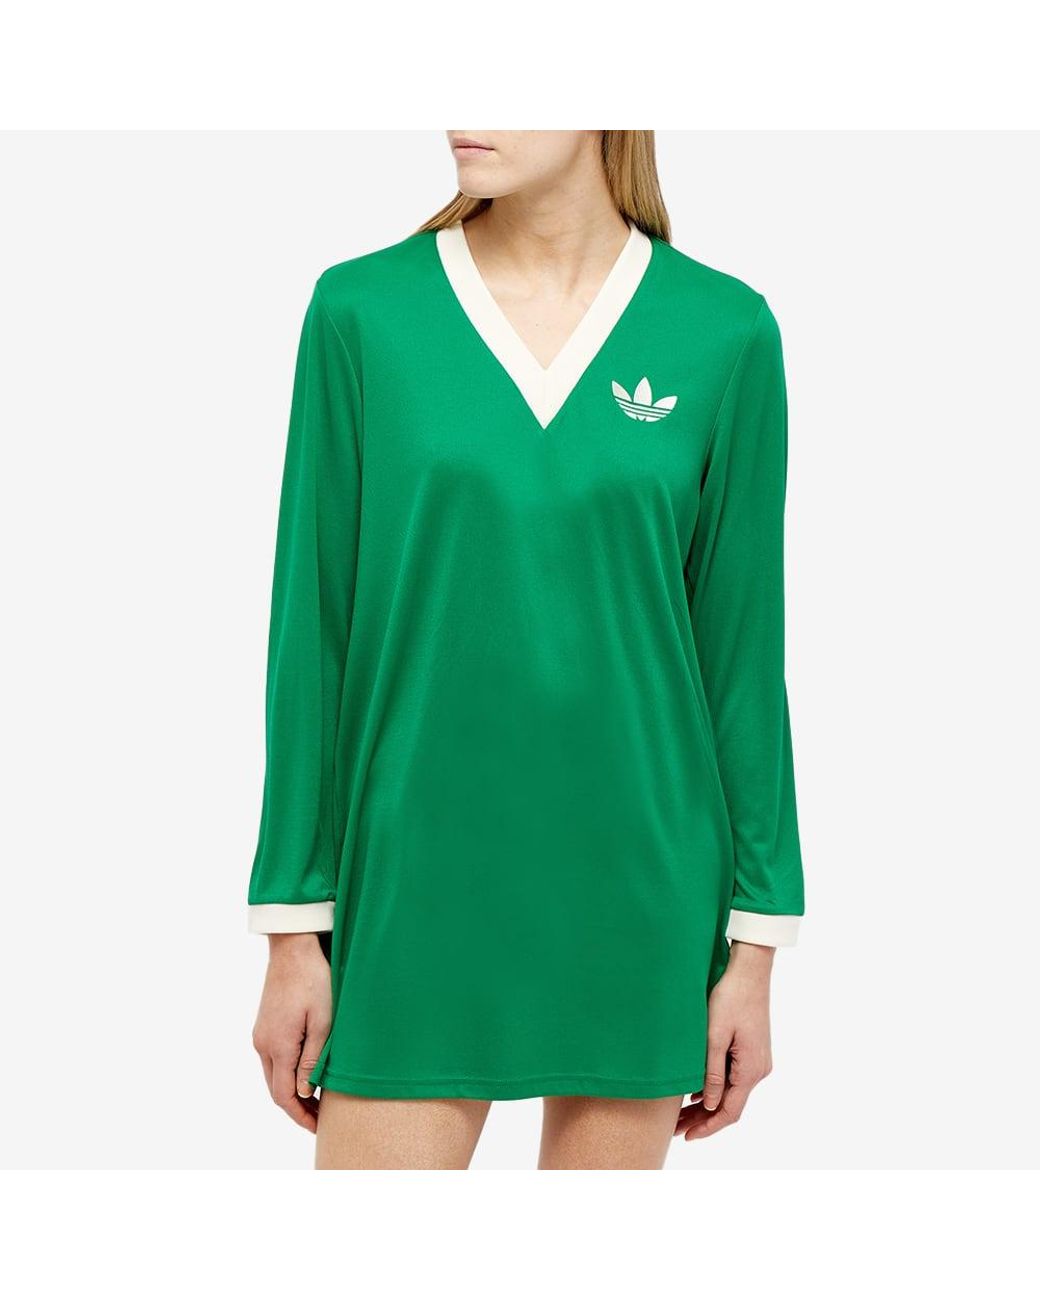 peber transmission Forekomme adidas Adicolor 70s Cali T-shirt Dress in Green | Lyst